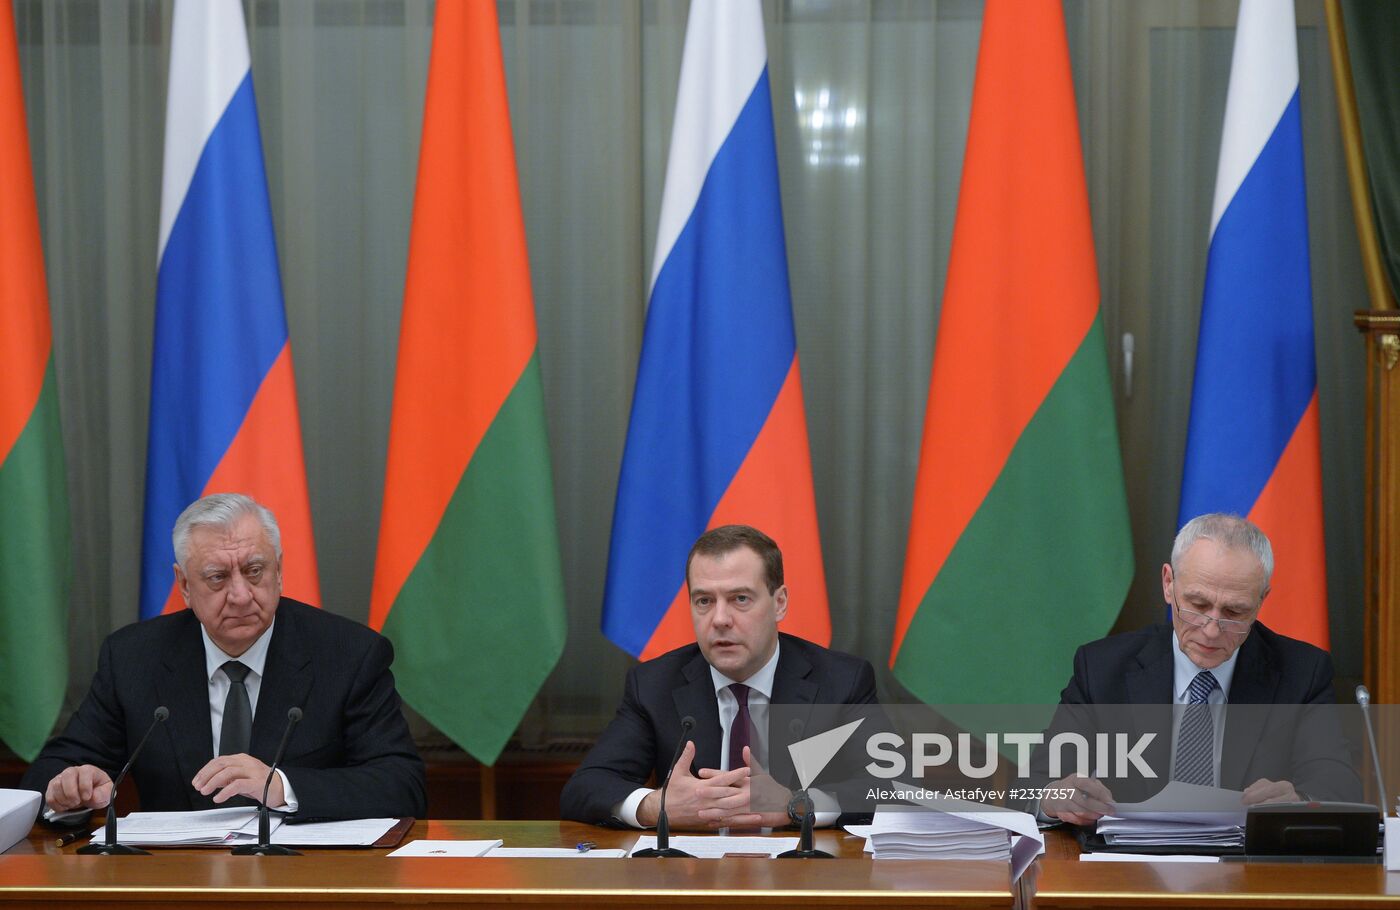 Ministerial meeting of Russia-Belarus Union State